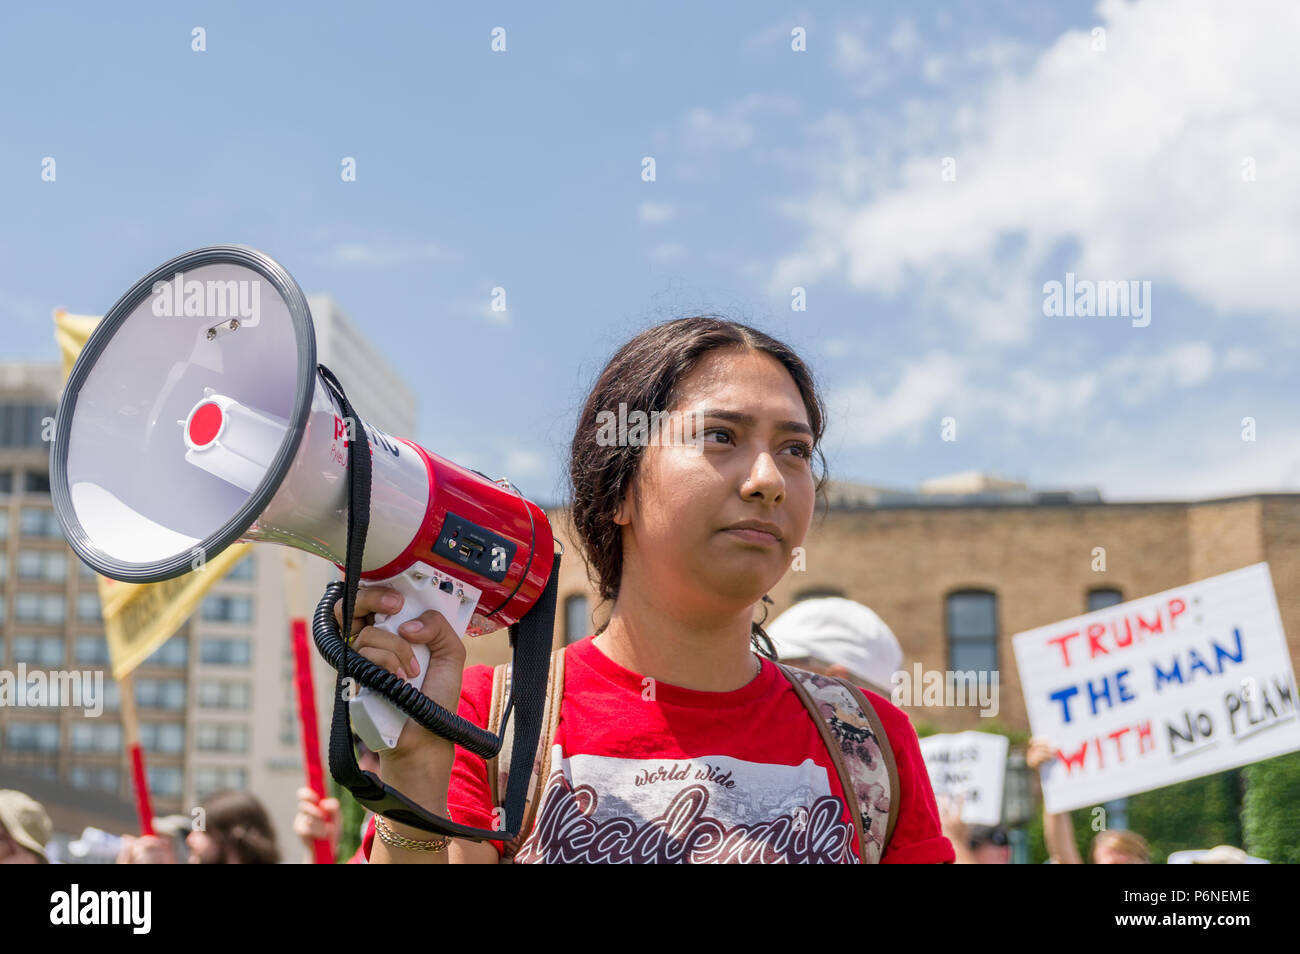 MINNEAPOLIS, MN/USA - JUNE 30, 2018: Unidentified individual holding a megaphone at  the Families Belong Together march. Stock Photo